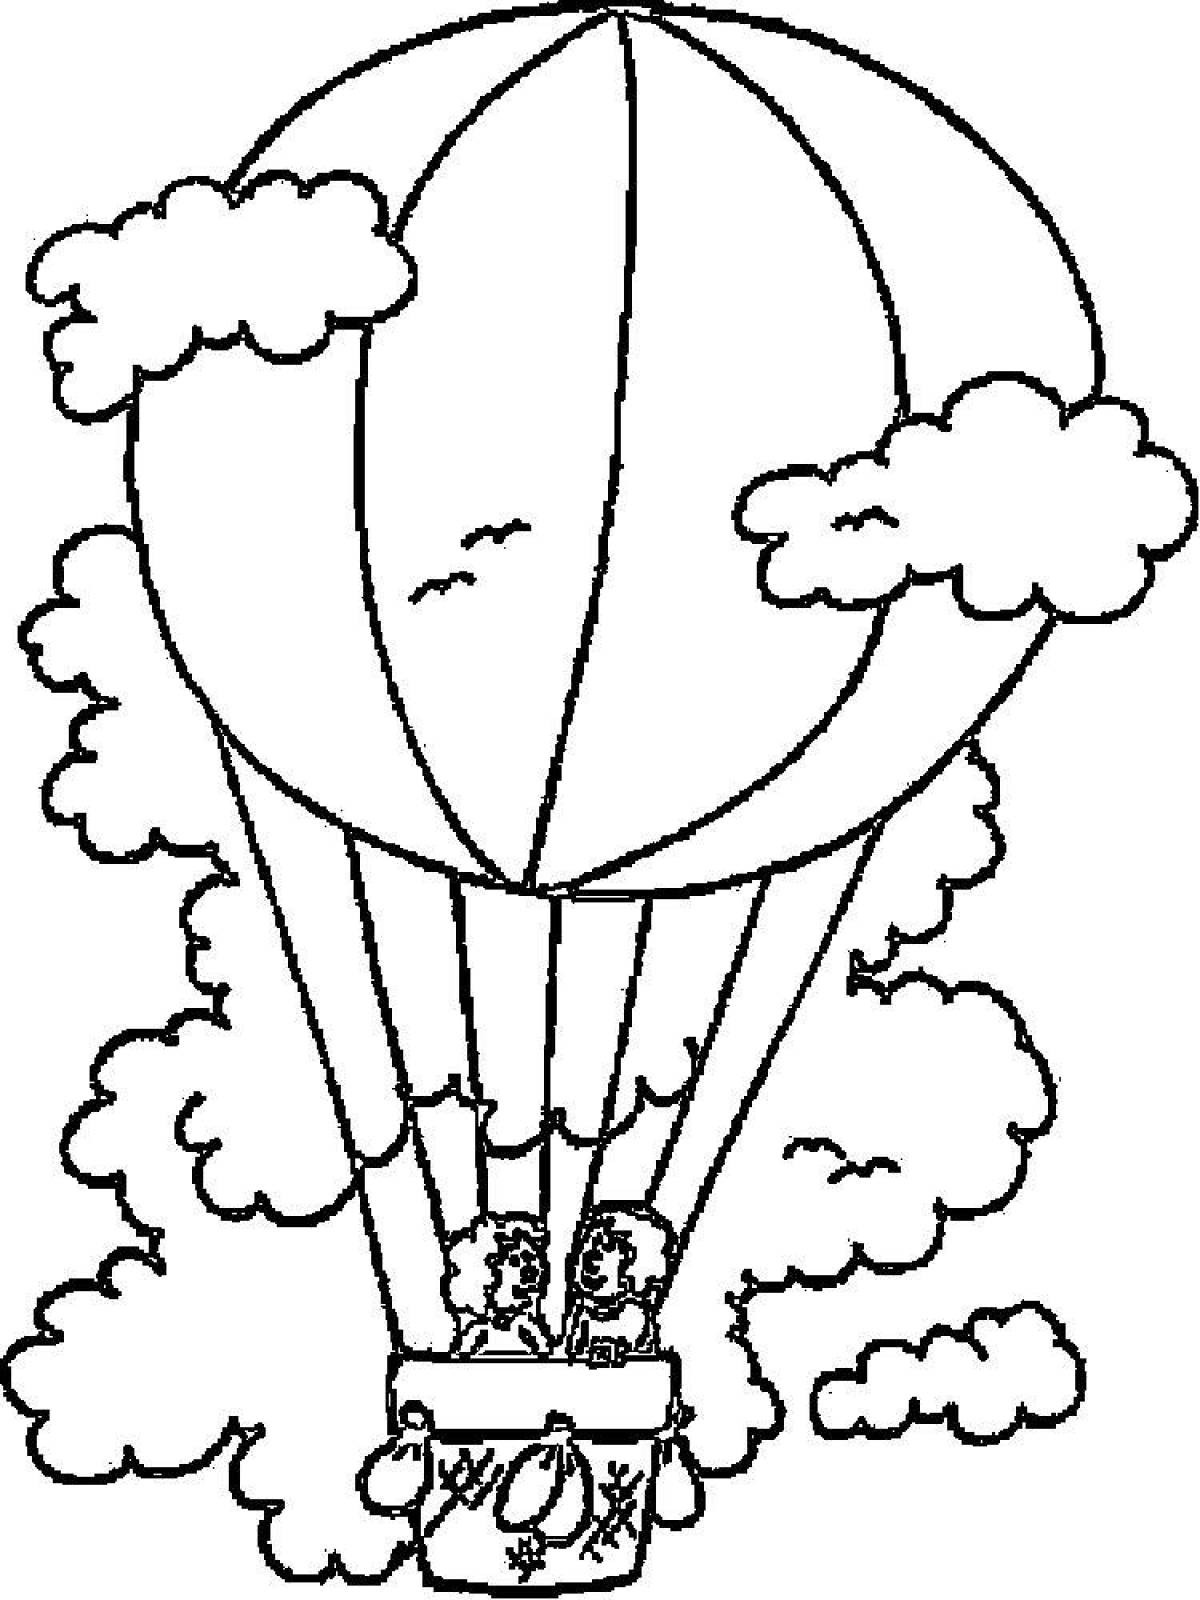 Colorful coloring page with balloons